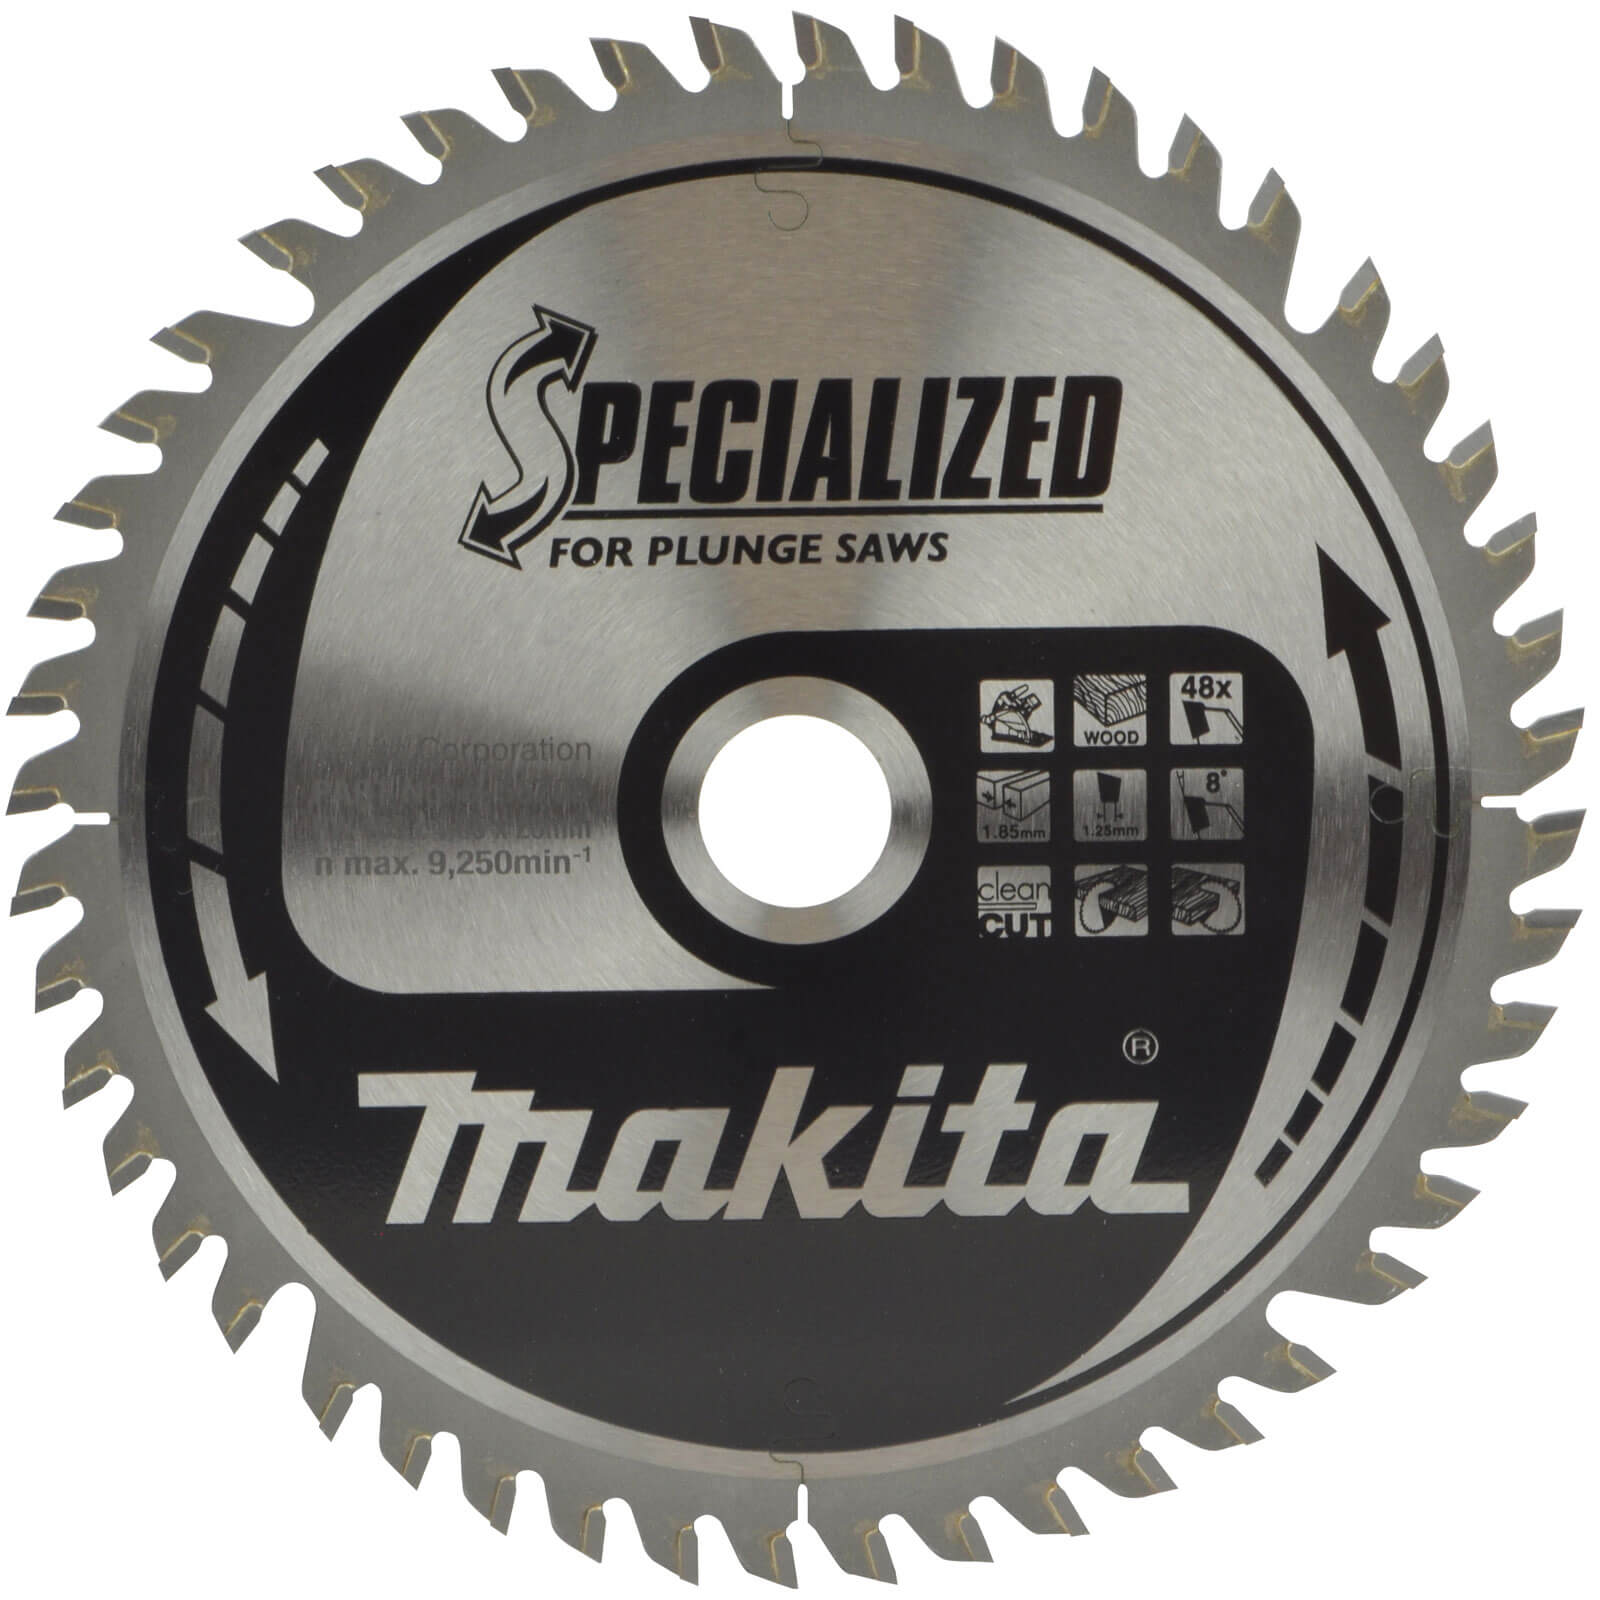 Makita SPECIALIZED Plunge Saw Wood Cutting Saw Blade 165mm 48T 20mm